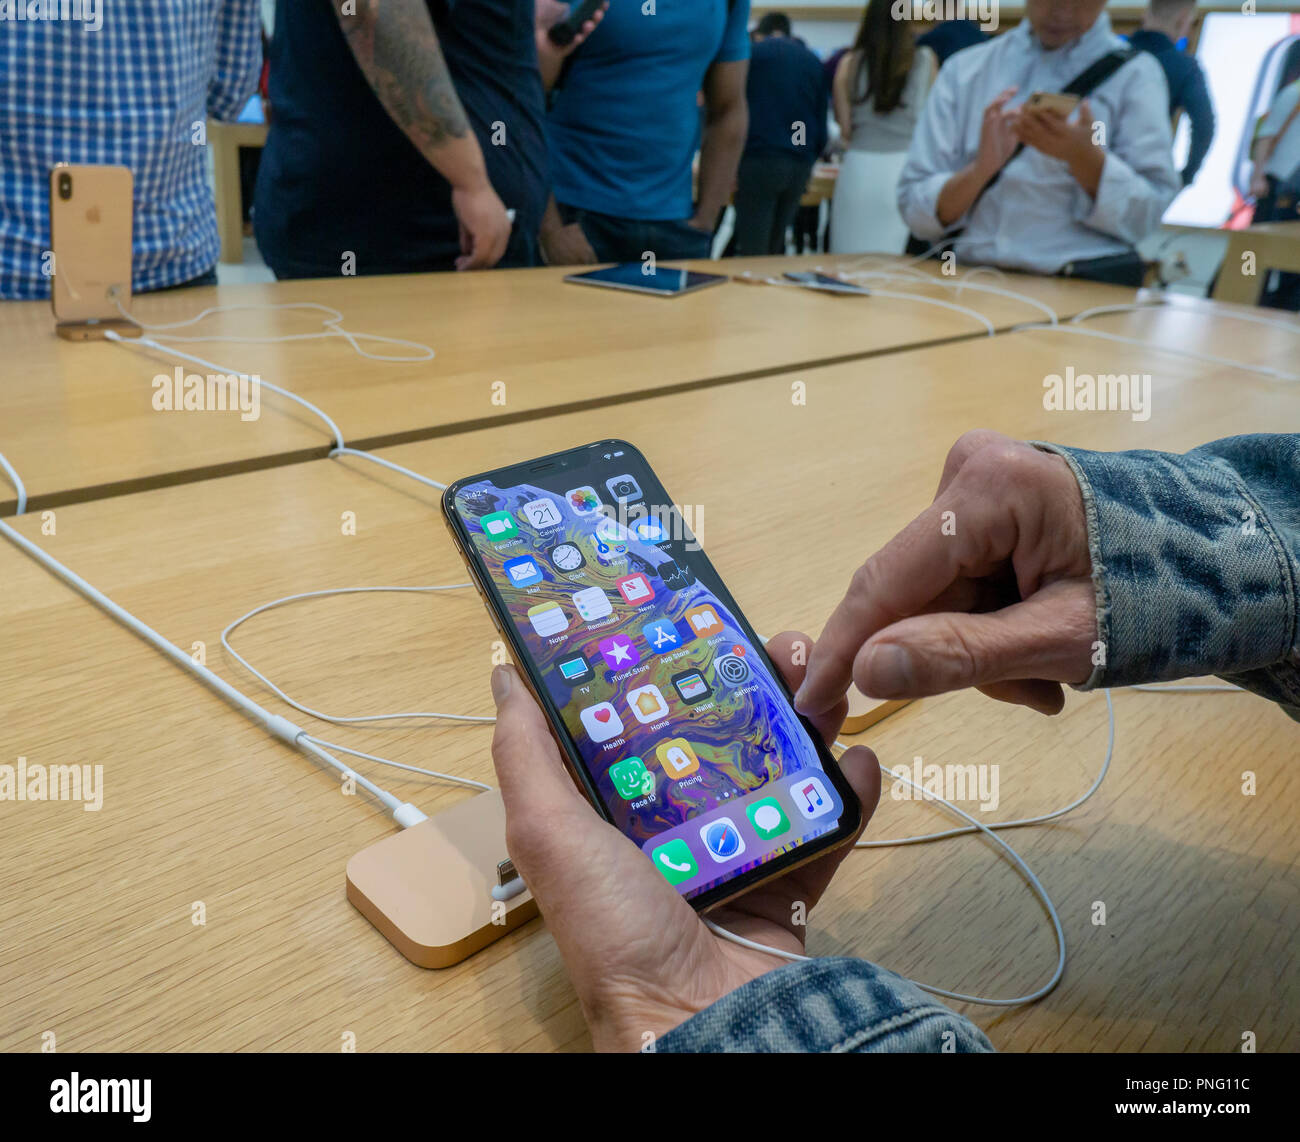 New York, USA. 21st September 2018. Customers in the Apple store in the WTC Transportation Hub in New York try out the new iPhone XS on Friday, September 21, 2018, the first day they went on sale.  The new phones, anxiously awaited by drooling iPhone aficionados, sell for a whopping $999 for the XS and $1099 for the XS Max with the Max having a 6.5 inch display.  (Â© Richard B. Levine) Credit: Richard Levine/Alamy Live News Credit: Richard Levine/Alamy Live News Stock Photo